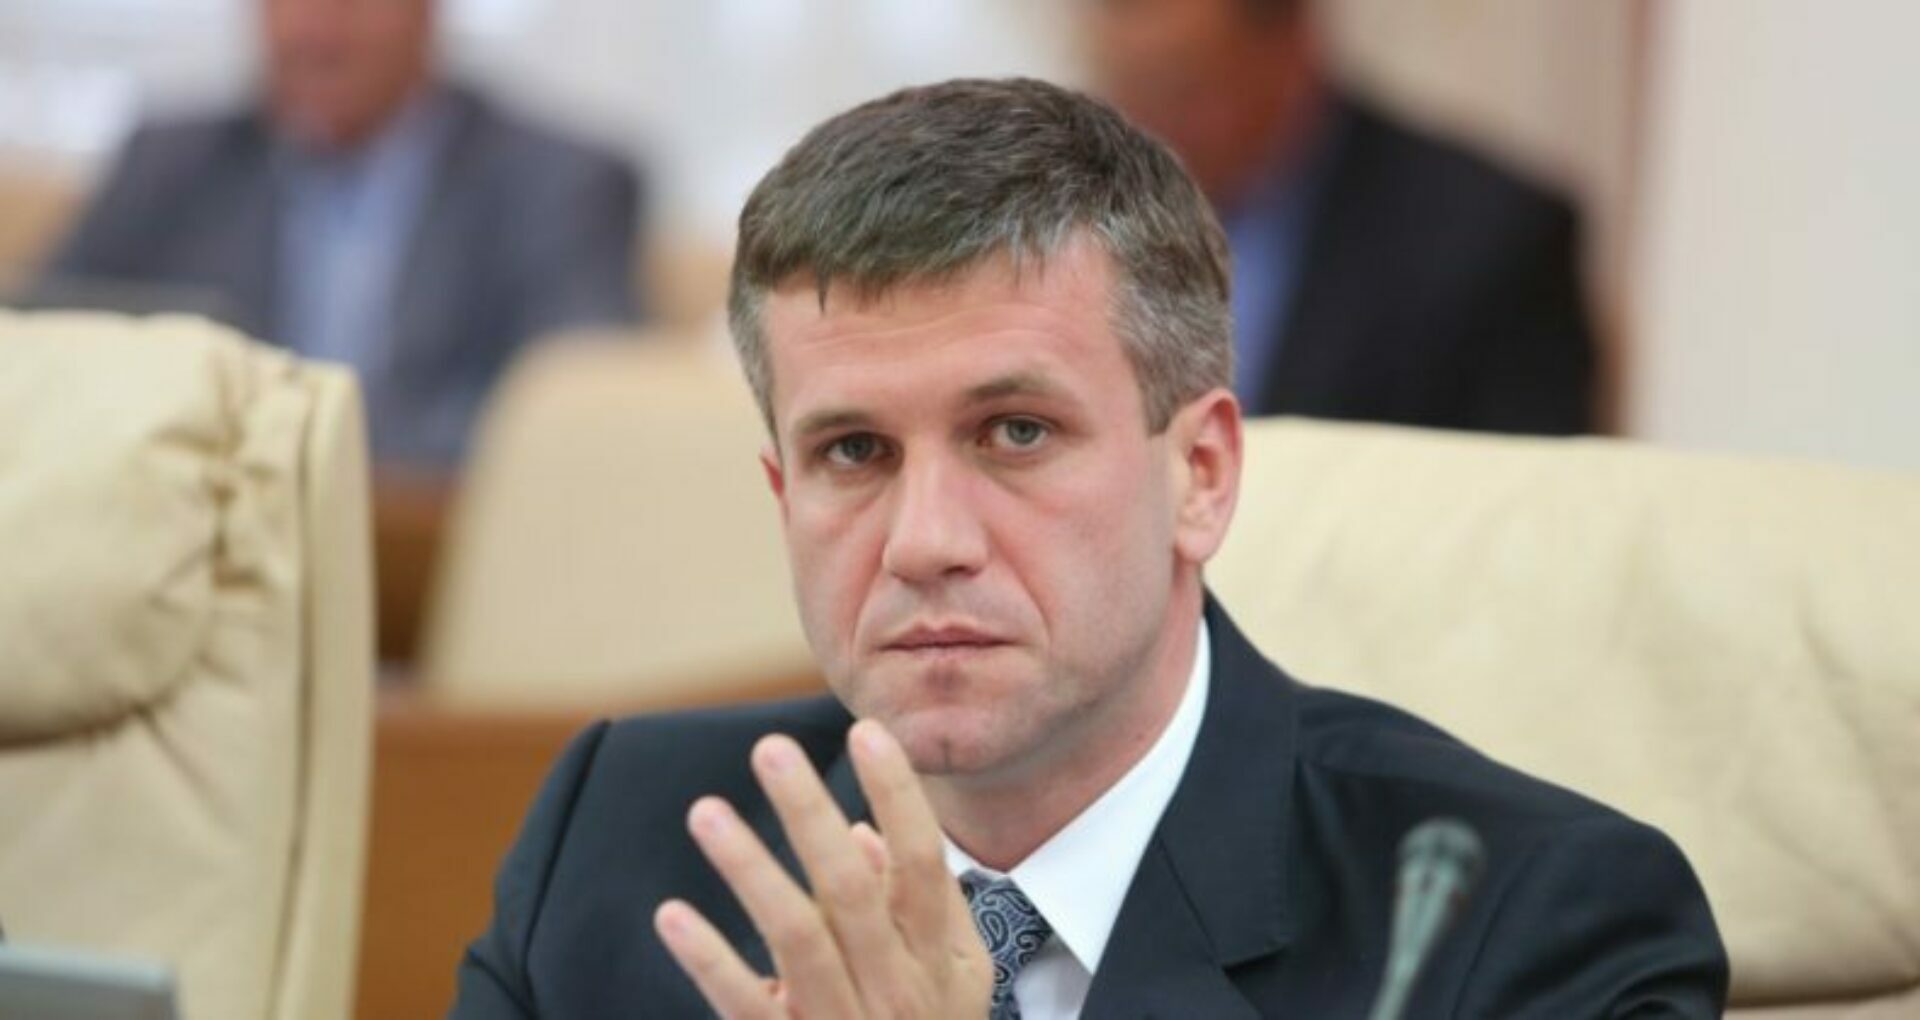 The Chisinau Court of Appeal has admitted the application of anti-corruption prosecutors against former Intelligence and Security Service Director Vasile Botnari and placed him under arrest for 30 days